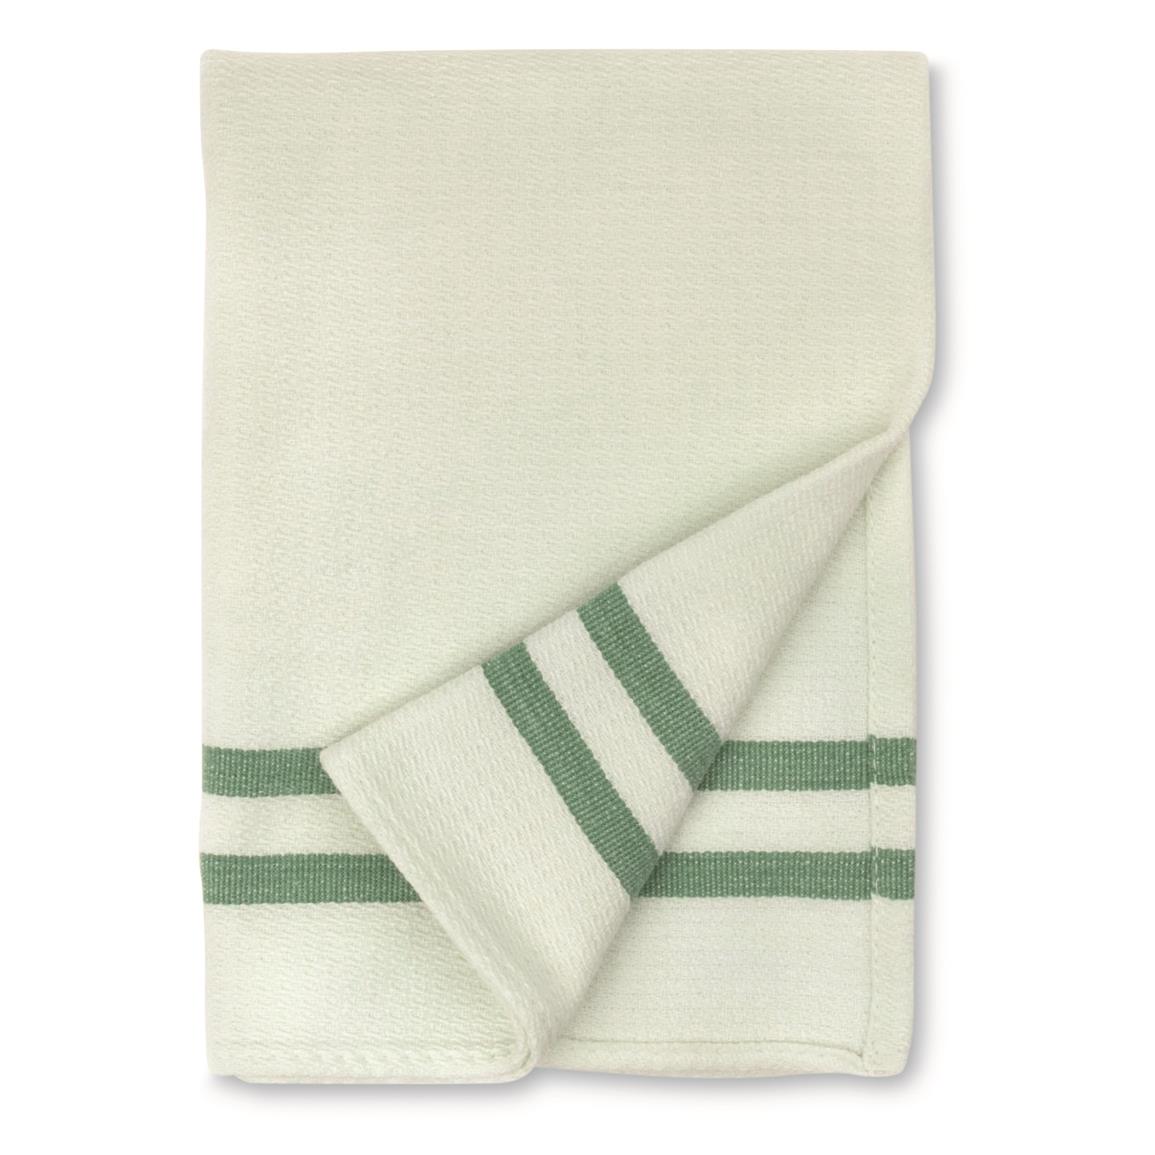 Czech Military Surplus Large Cotton Towels, 4 Pack, New